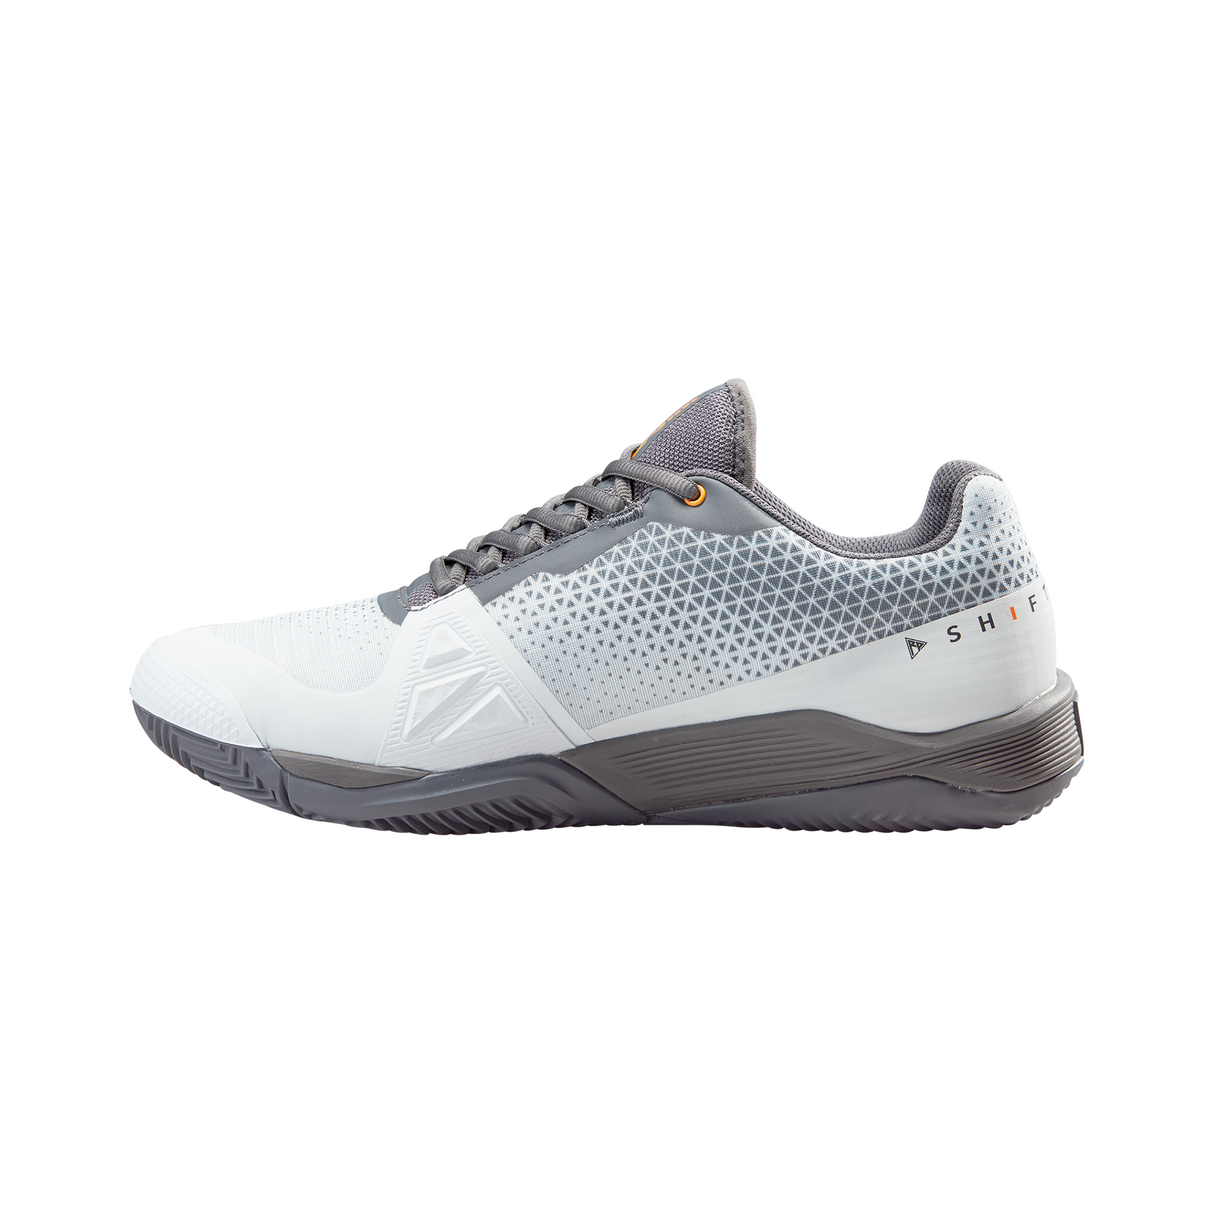 Rush Pro 4.0 Clay Court Tennis Shoes (Ladies) - Shift Edition